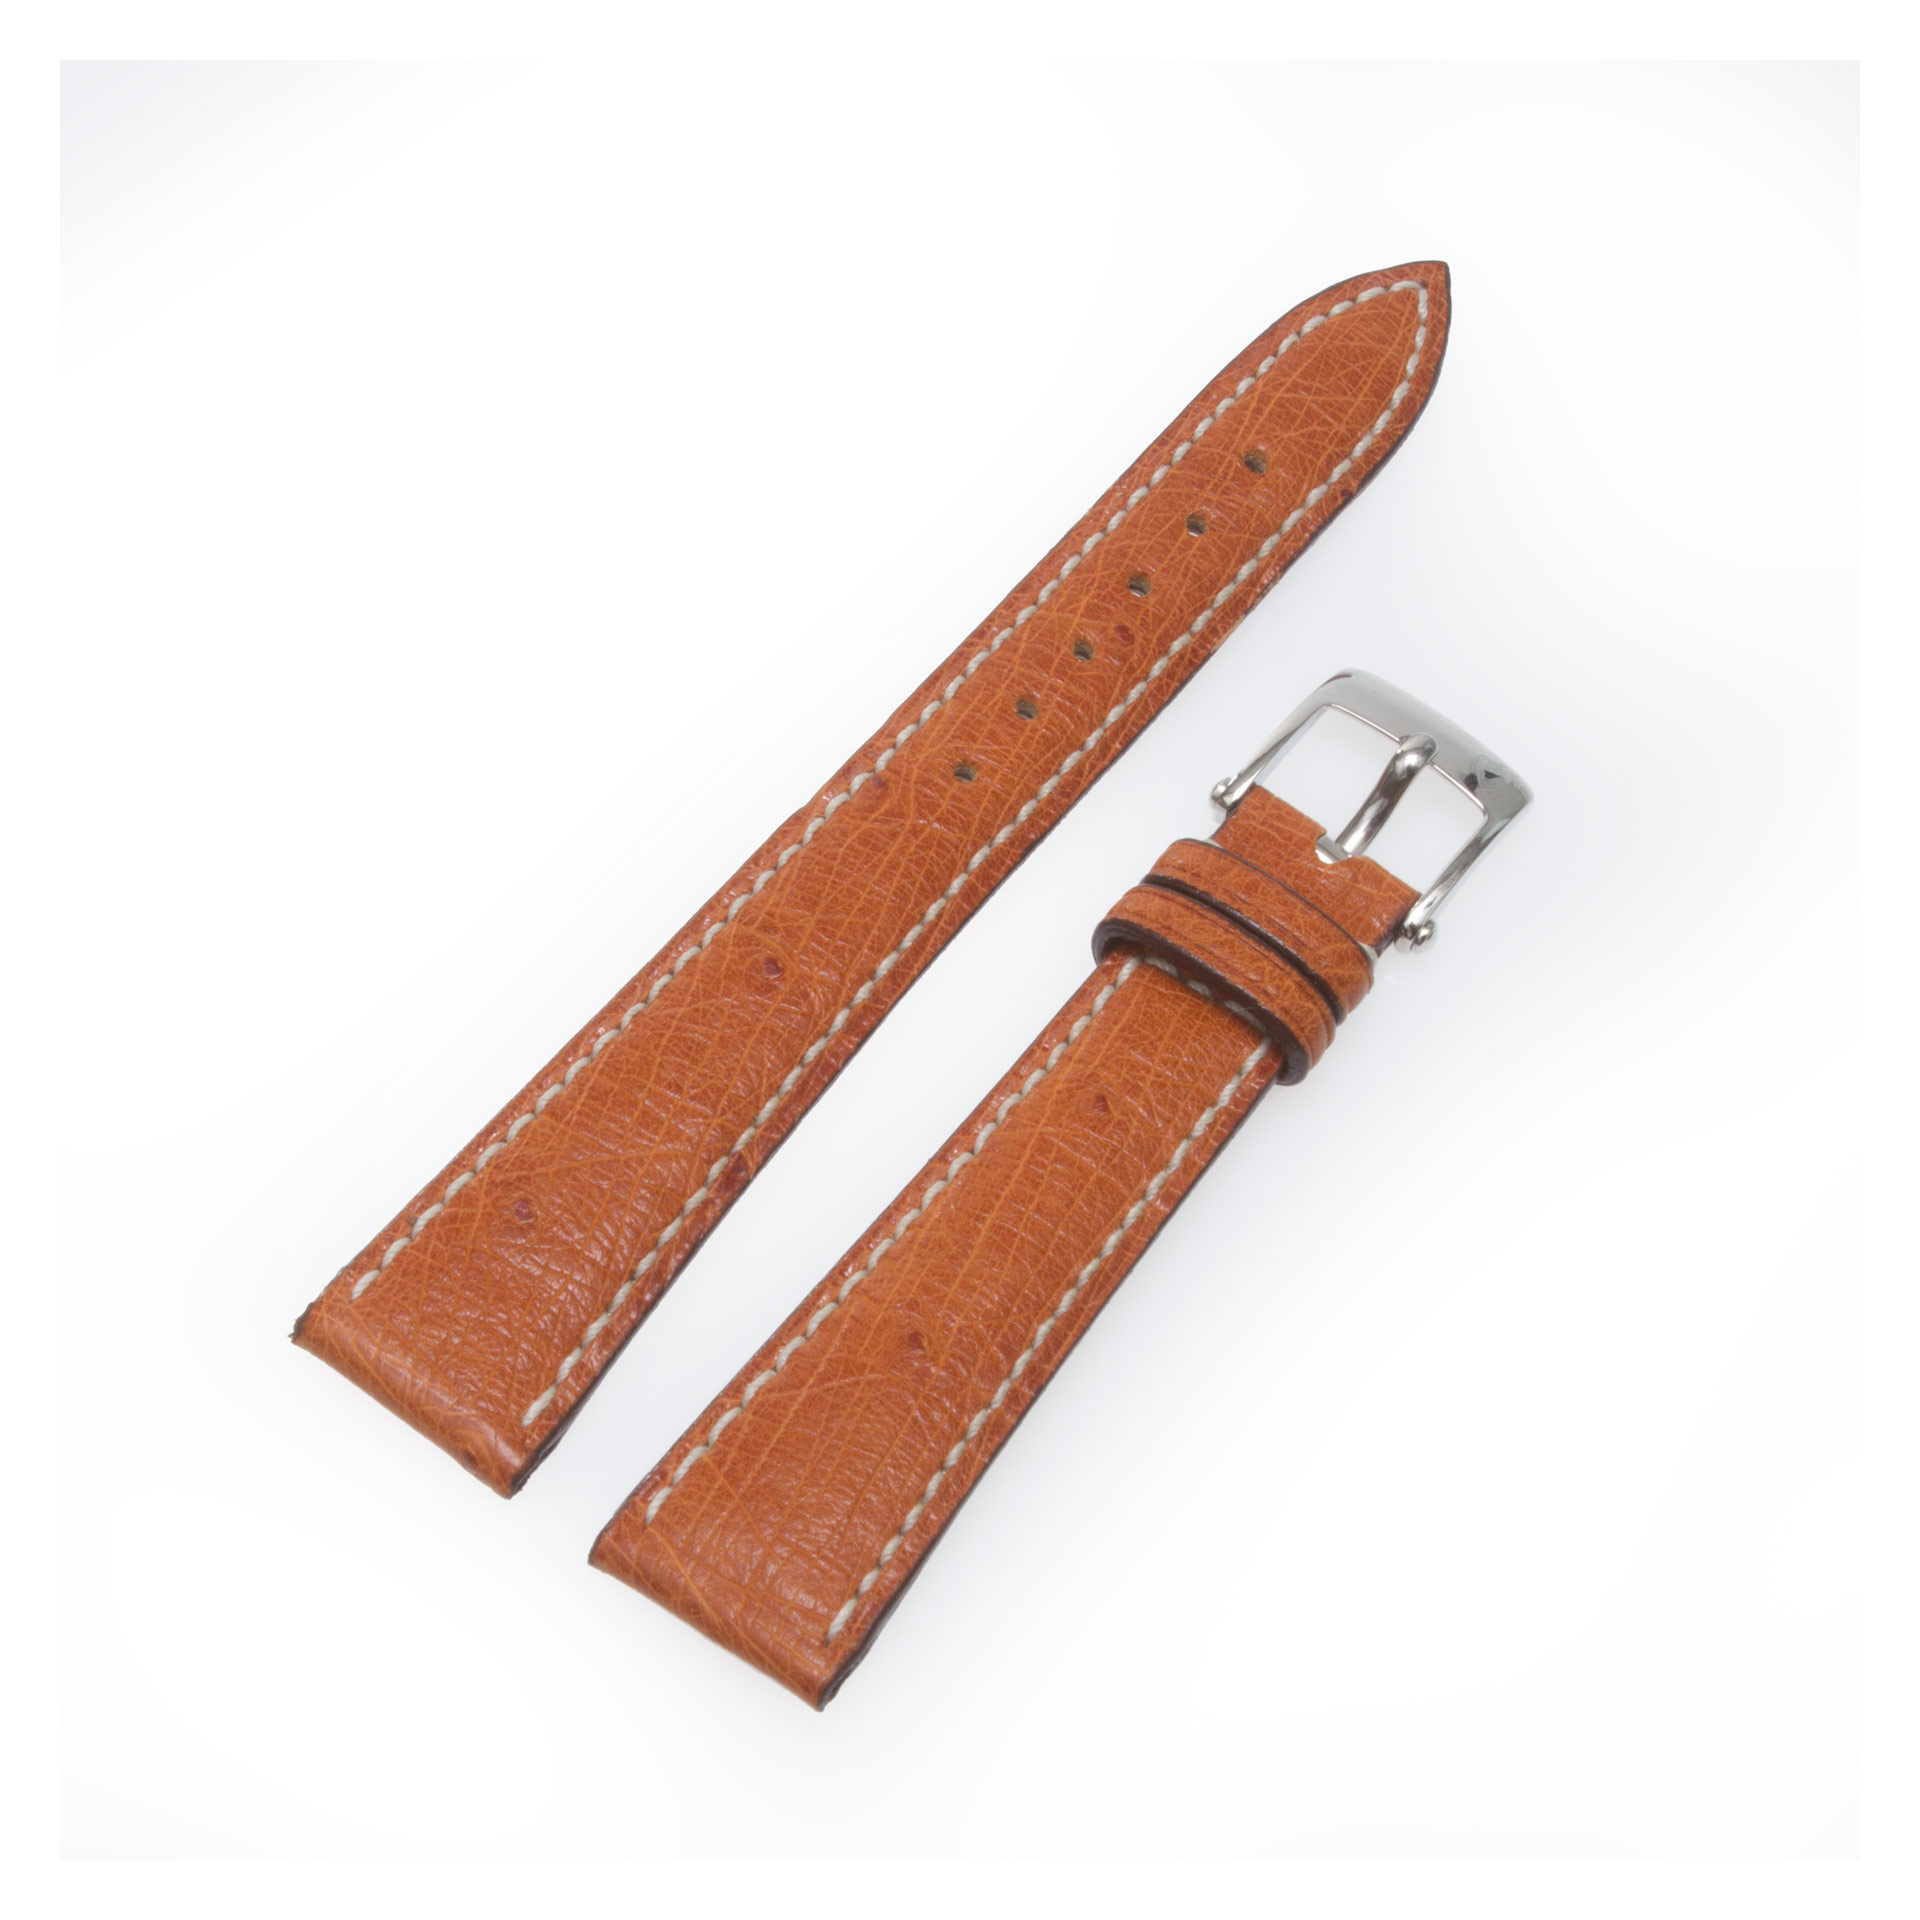 Van Cleef & Arpels bright brown ostrich strap with stainless steel tang buckle 16mm x 12mm